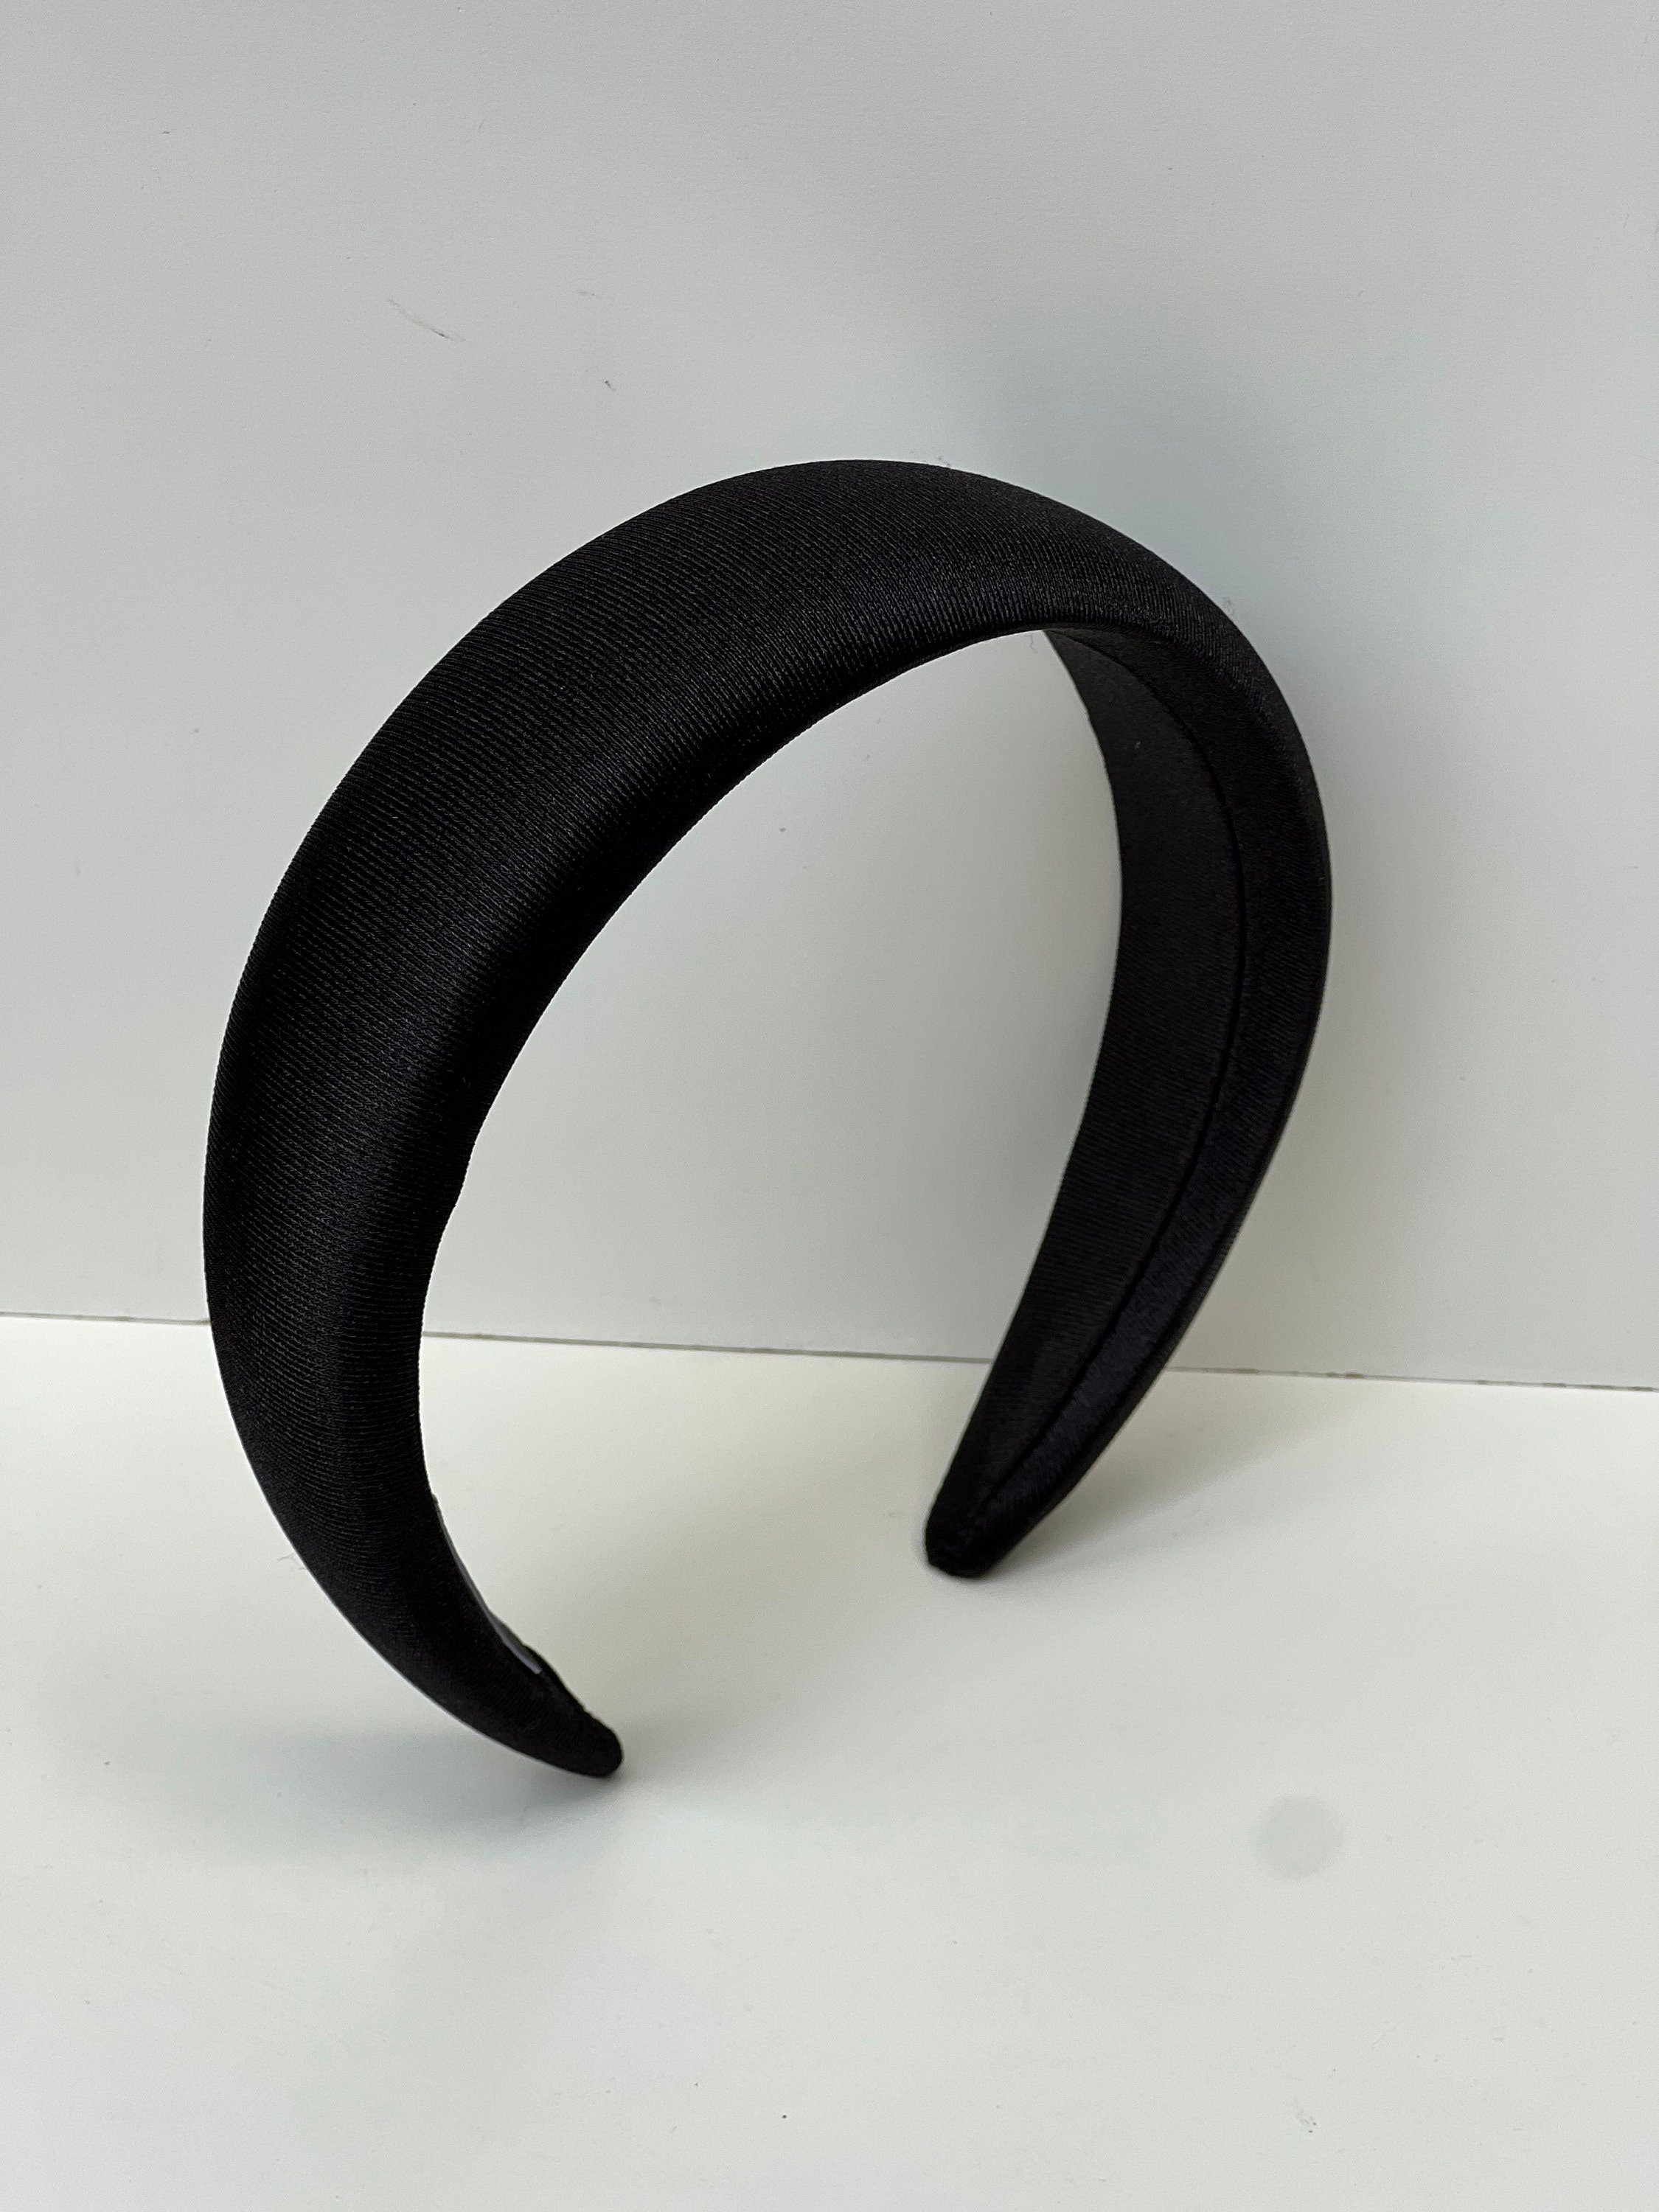 Stay comfortable and stylish with these black satin headbands, featuring a padded design for all-day wear.